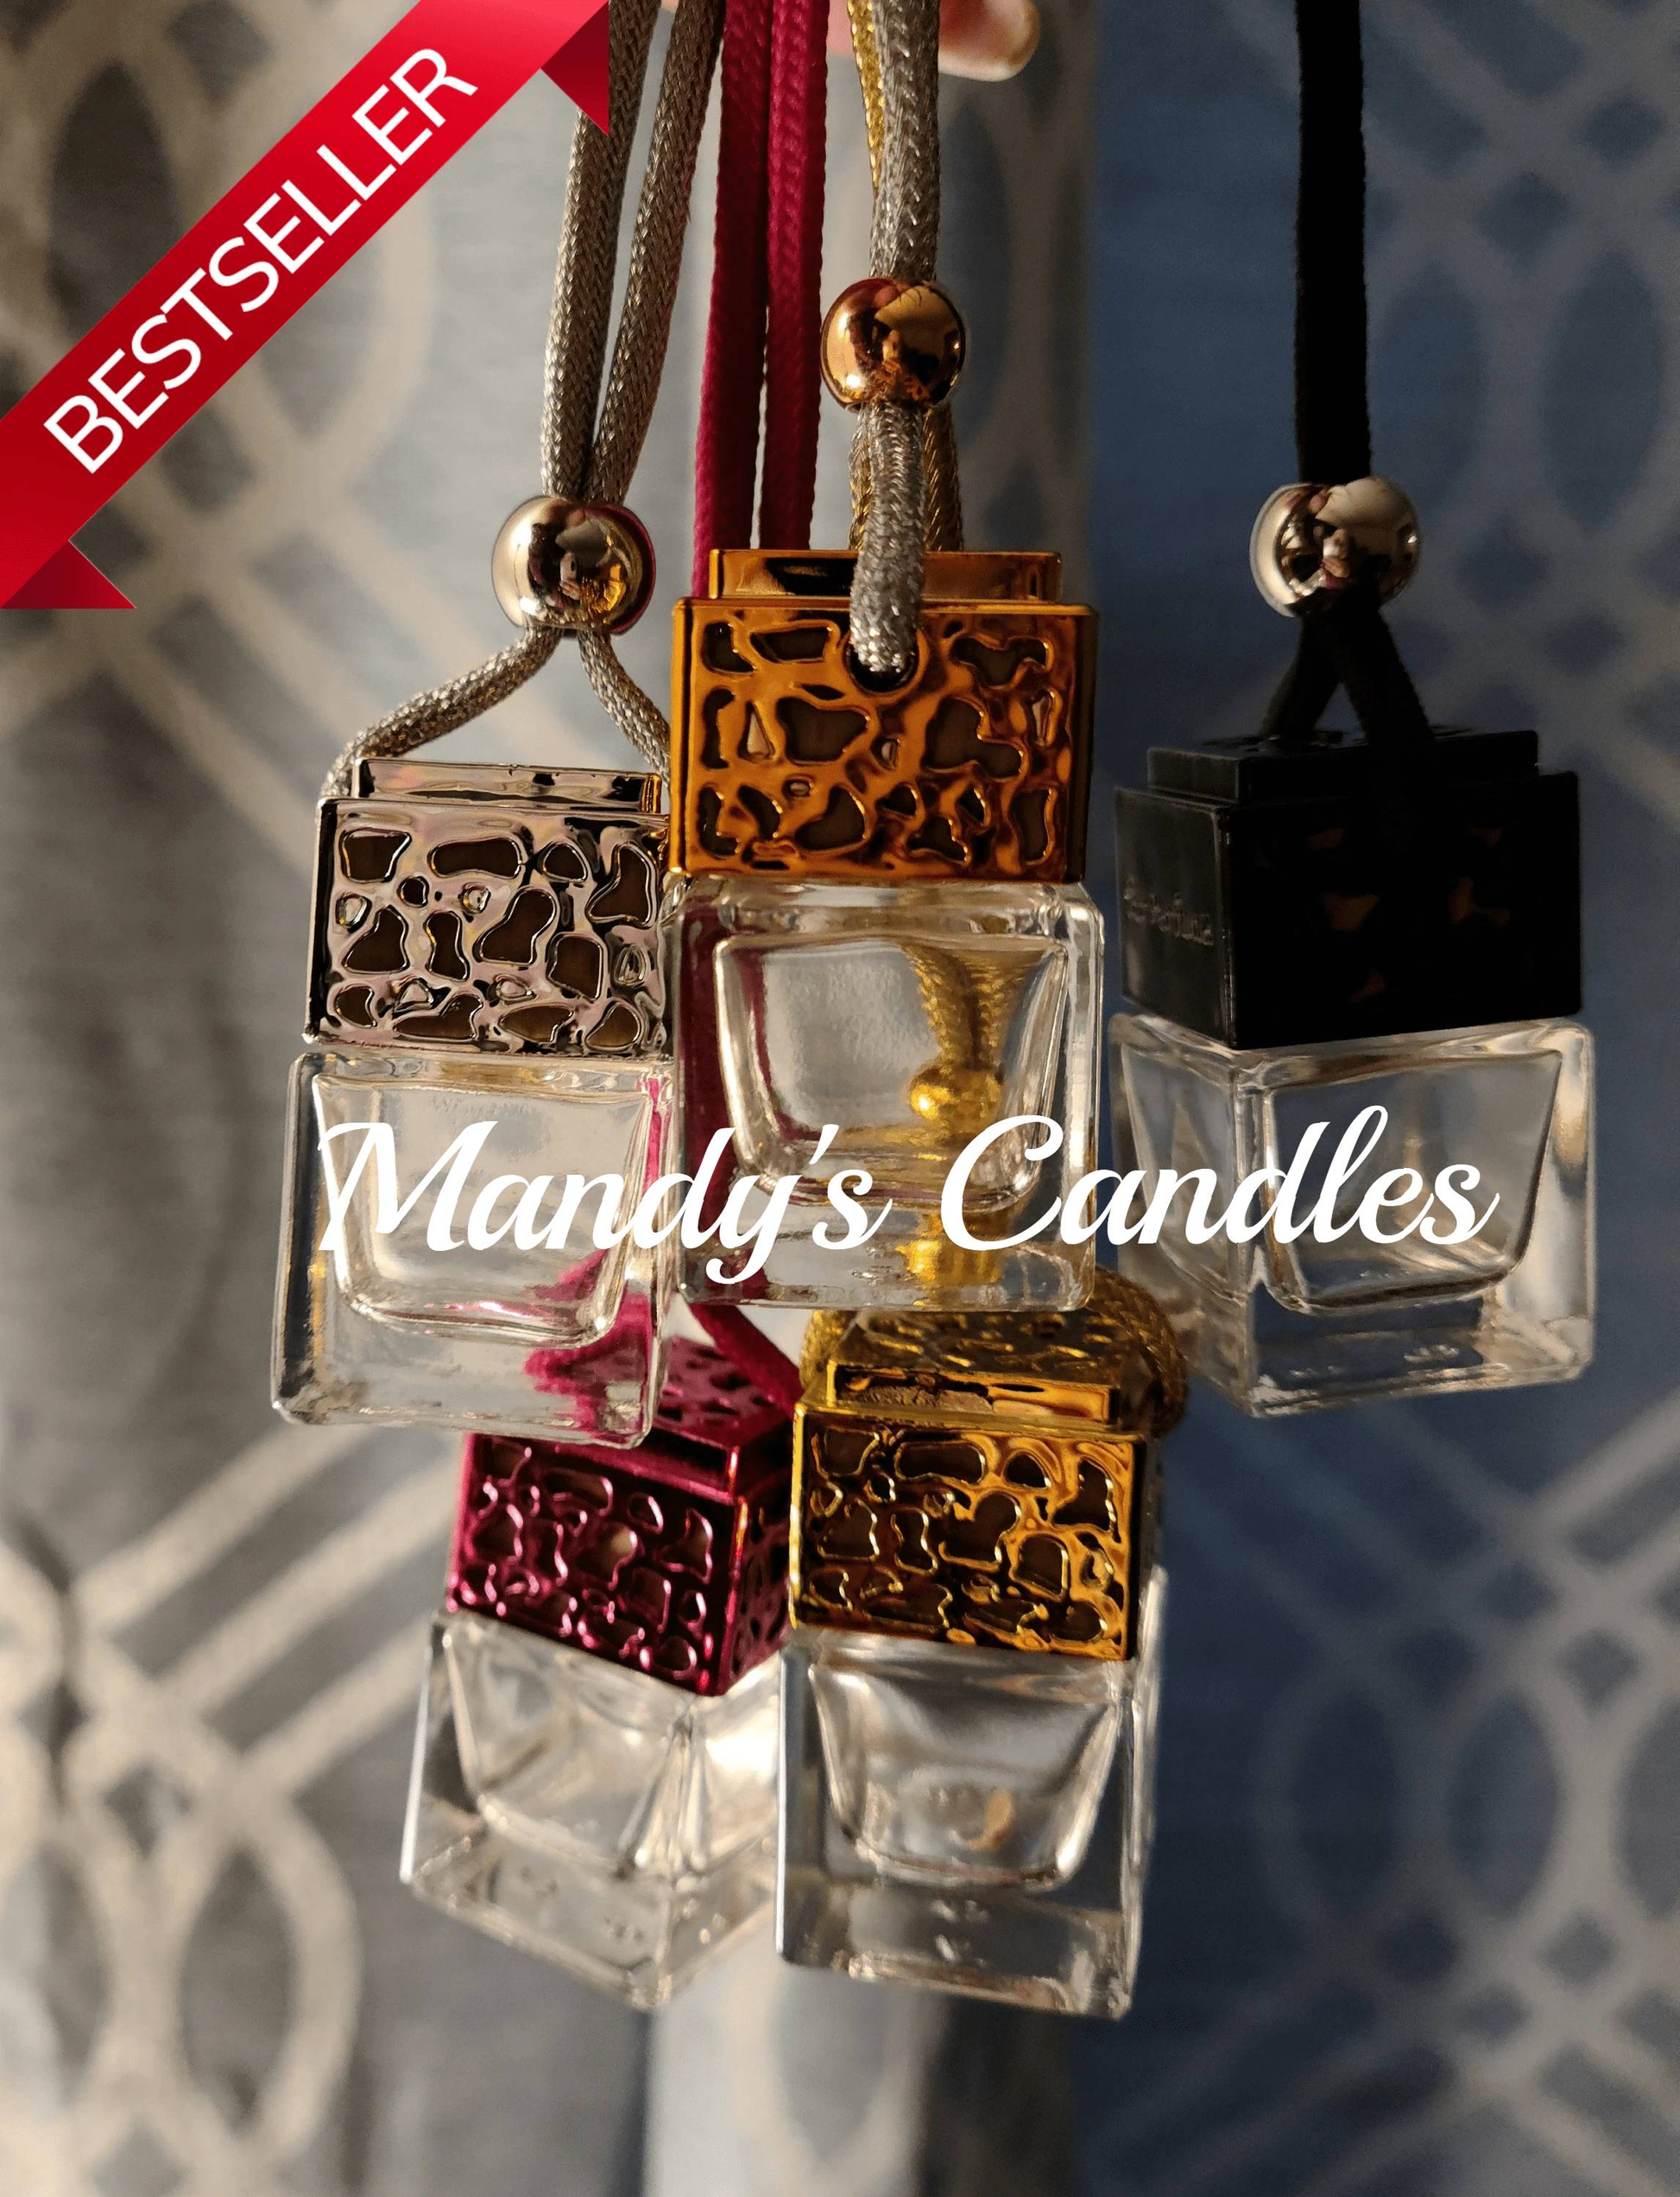 Elegant Rose Gold Car Air Fresheners. – Mandy's Handcrafted Candles